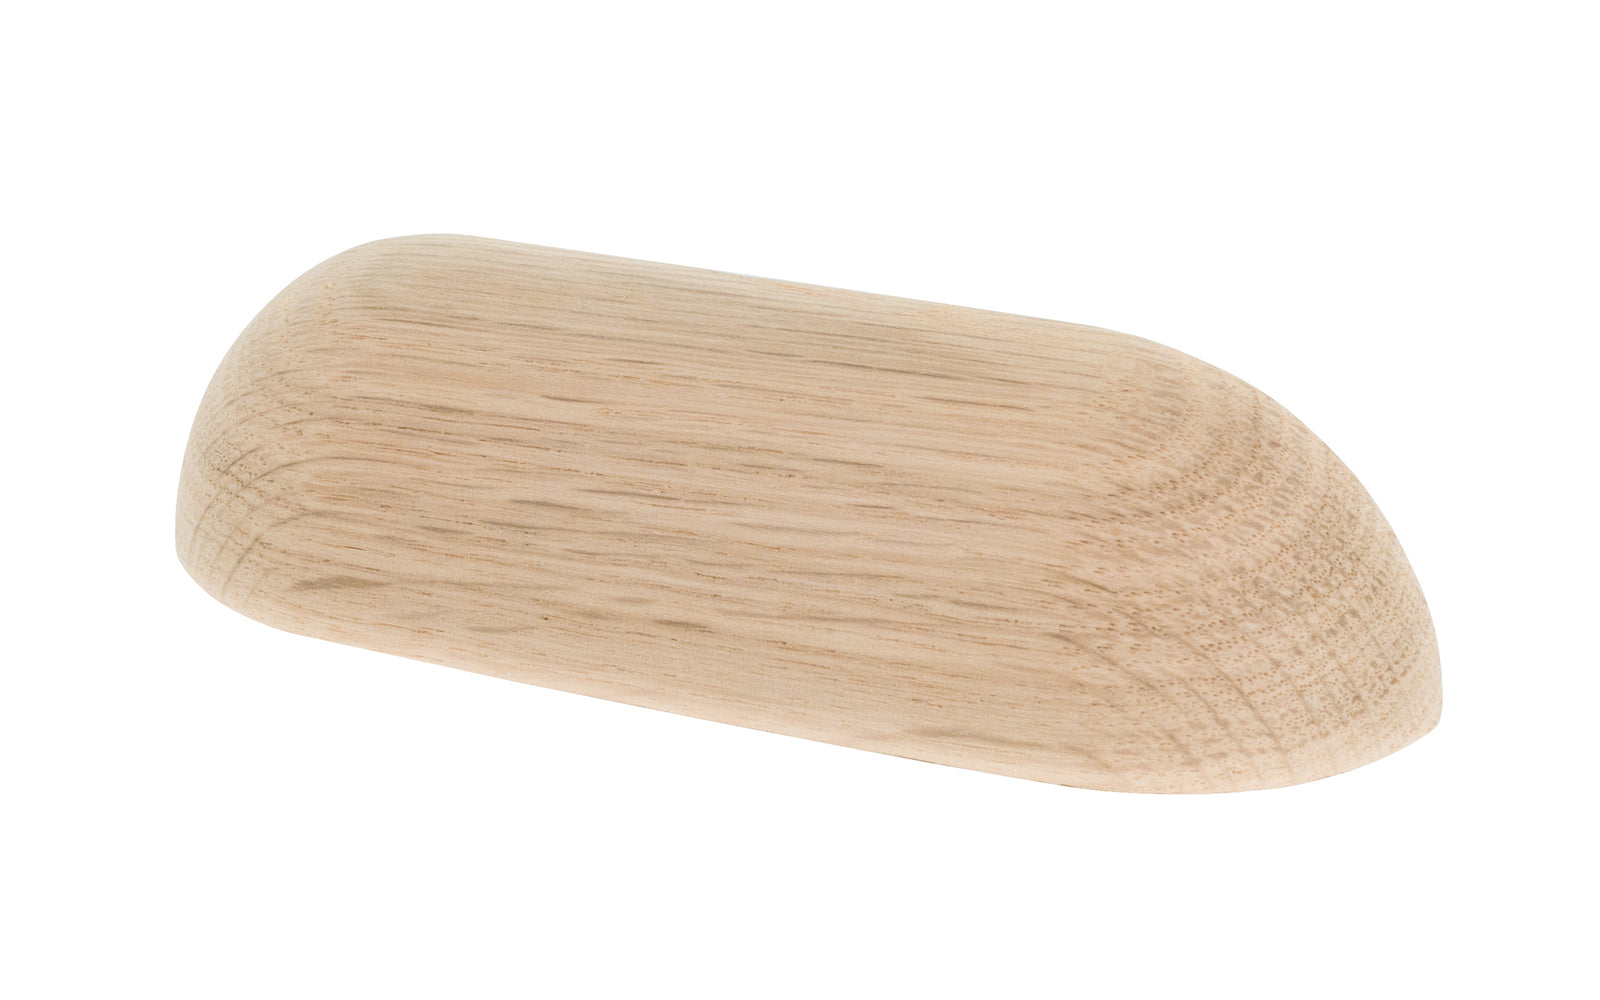 Classic & traditional smooth oak wood handle pull with 3-3/4" On Centers. Made of unfinished solid oak wood, this handle has a smooth feel & nice-looking grain to it. It may even be stained, painted, or varnished if desired. 3-3/4" spacing of screw holes ~ Smooth design ~ Solid oak pull.